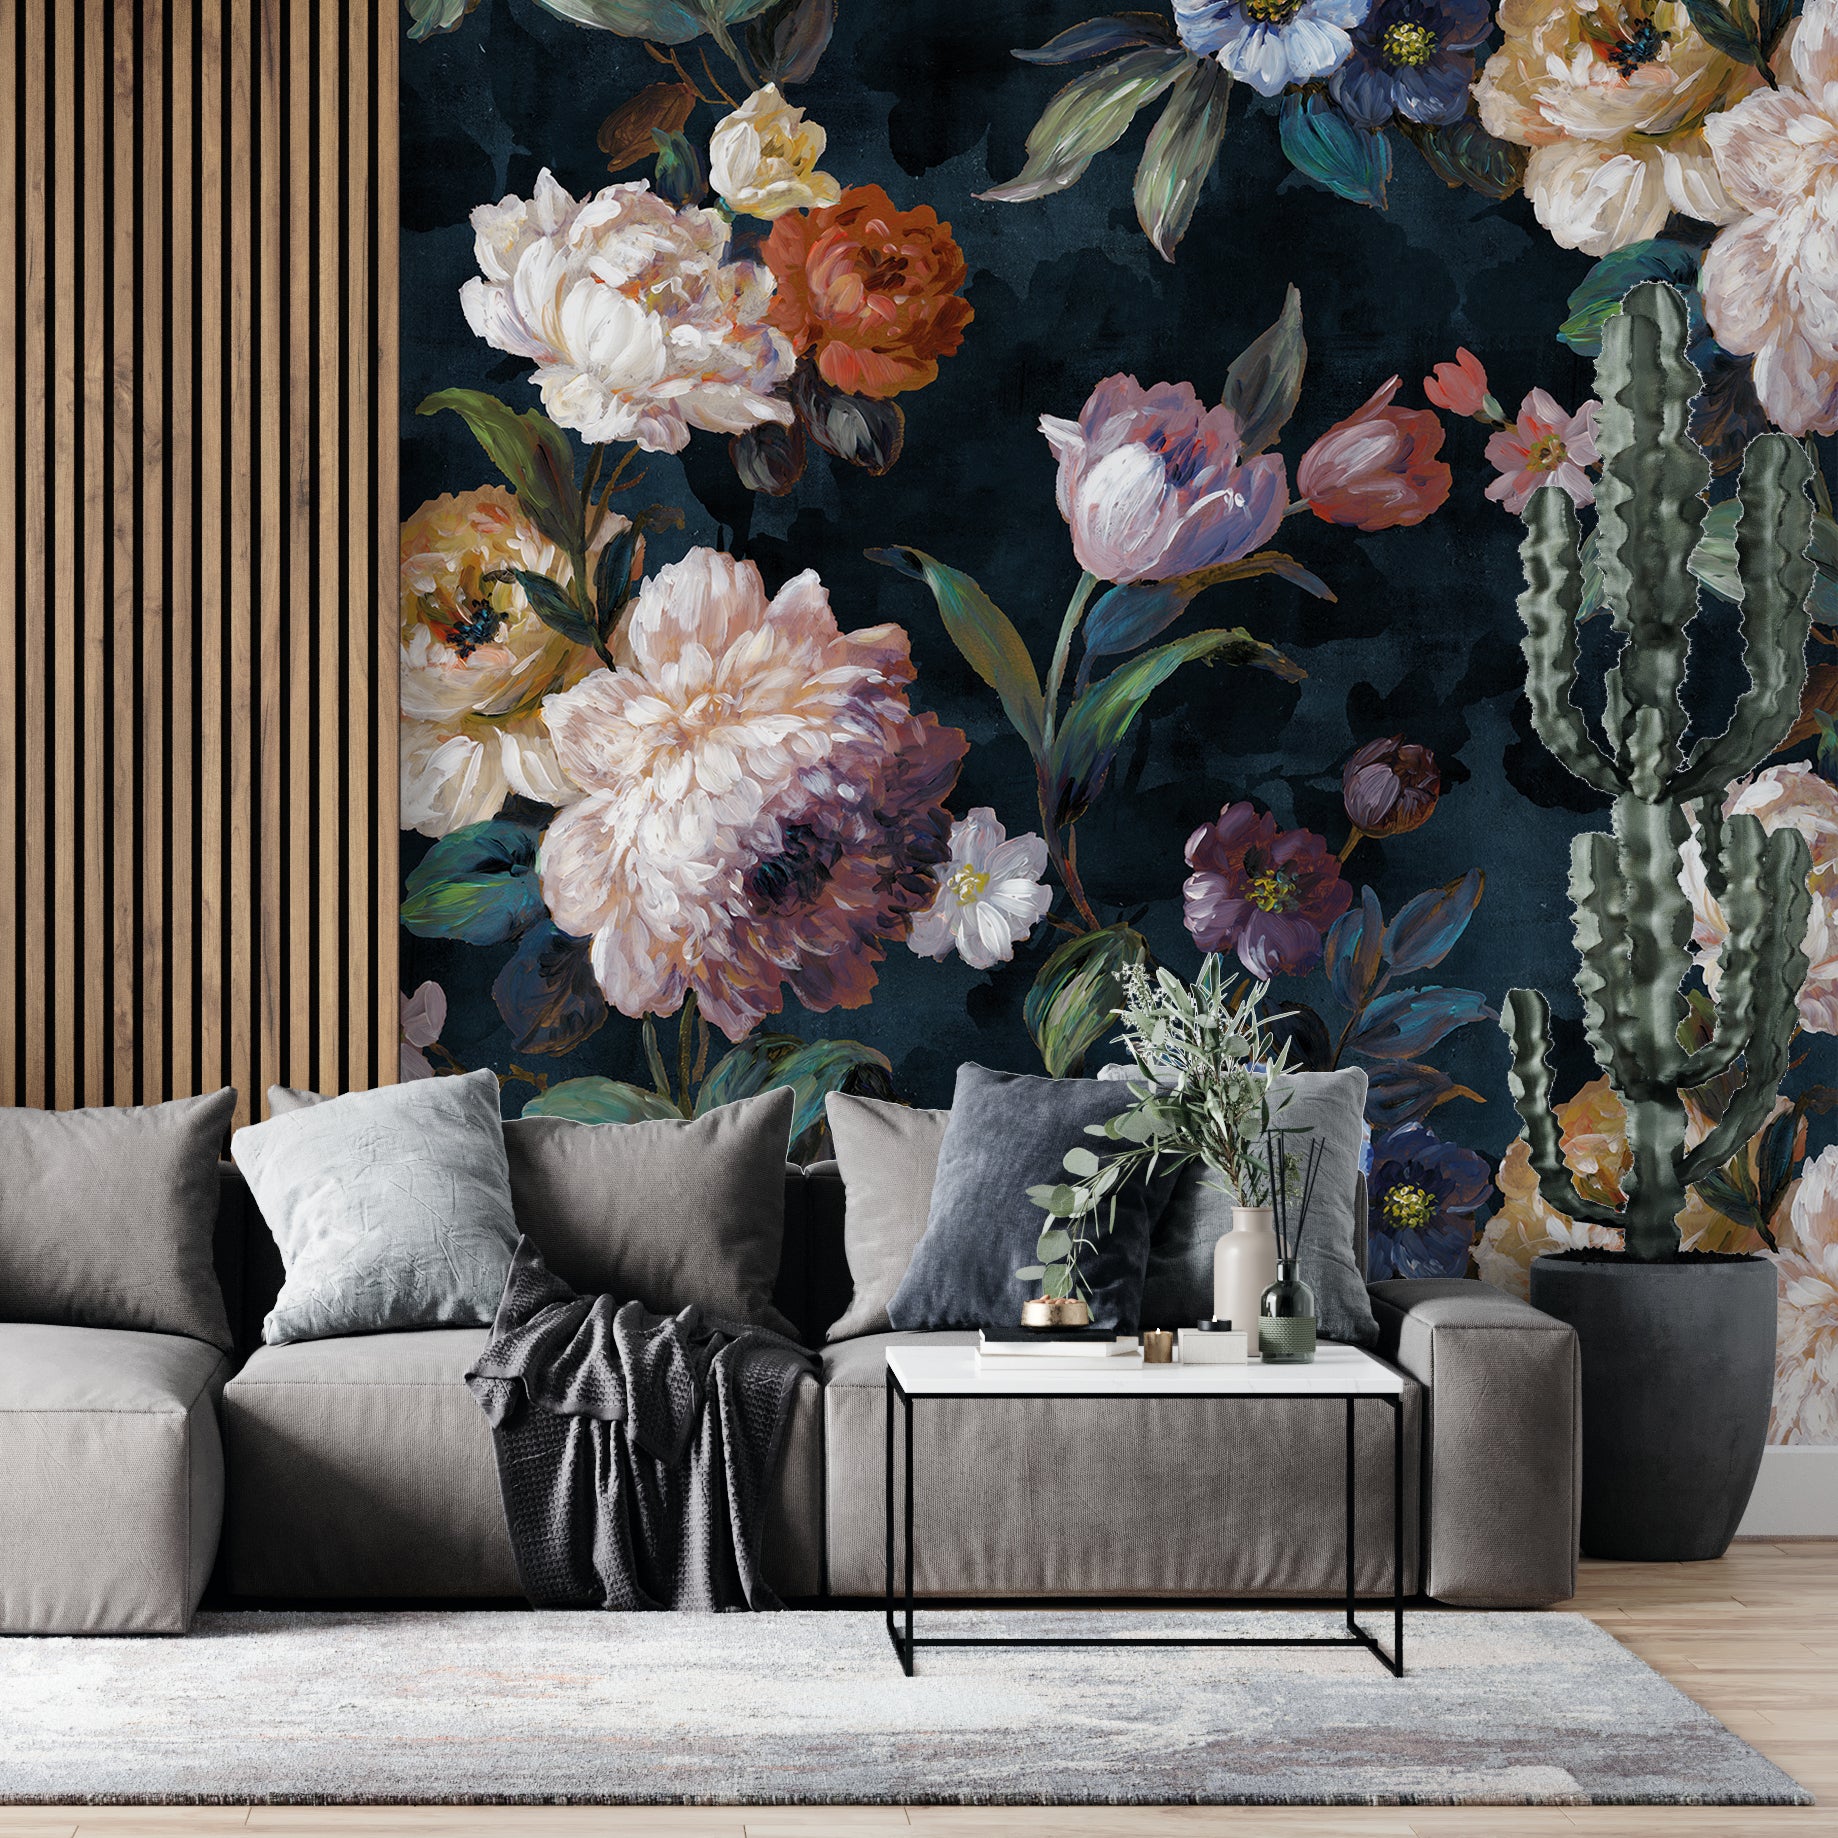 Melli Mello Steal the night photowall wallpaper floral deco eyecatcher be different room deco 